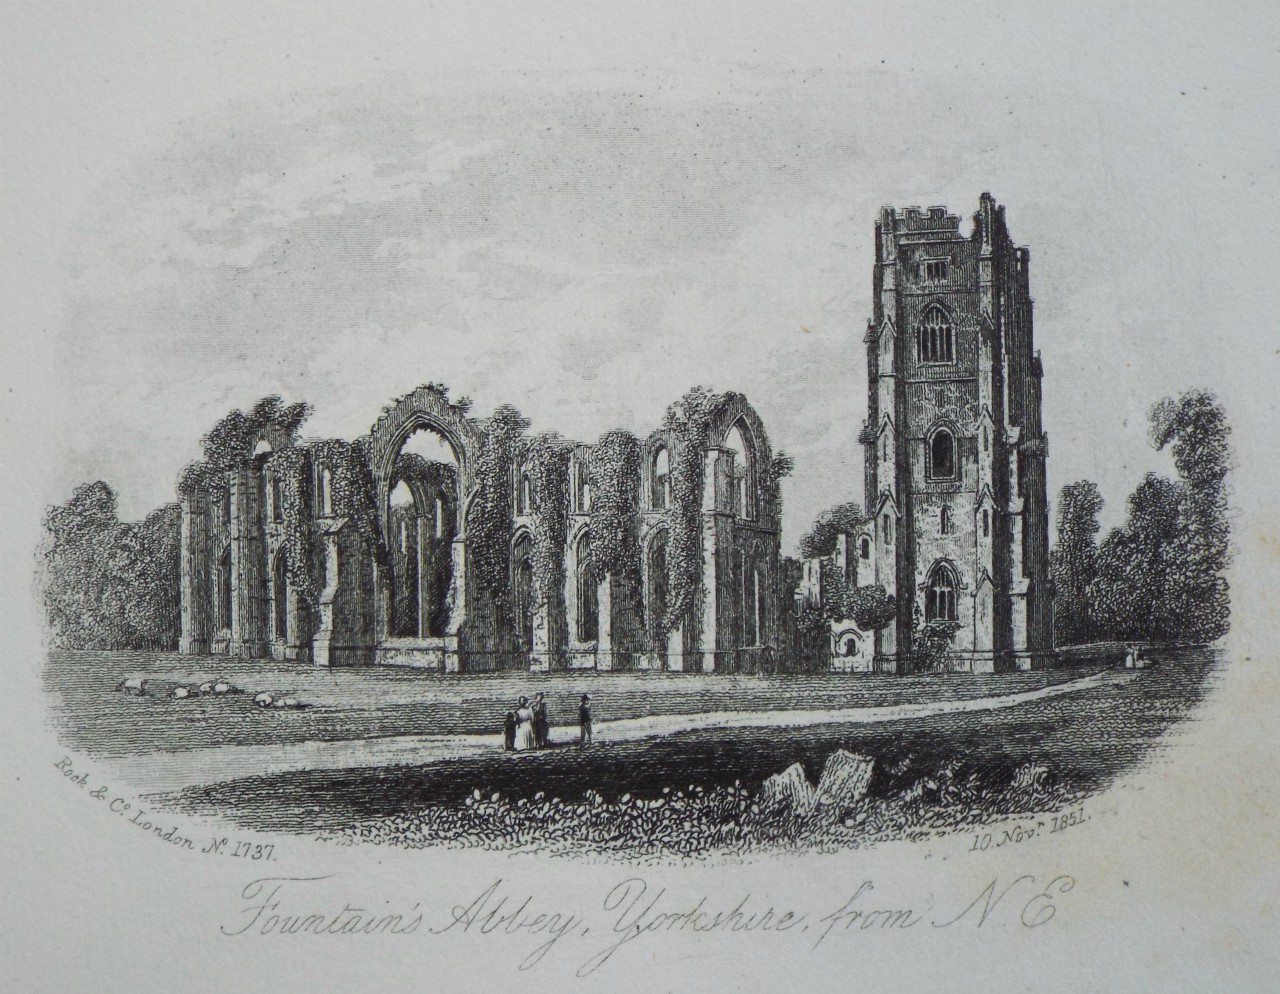 Steel Vignette - Fountains Abbey, Yorkshire, from N.E. - Rock